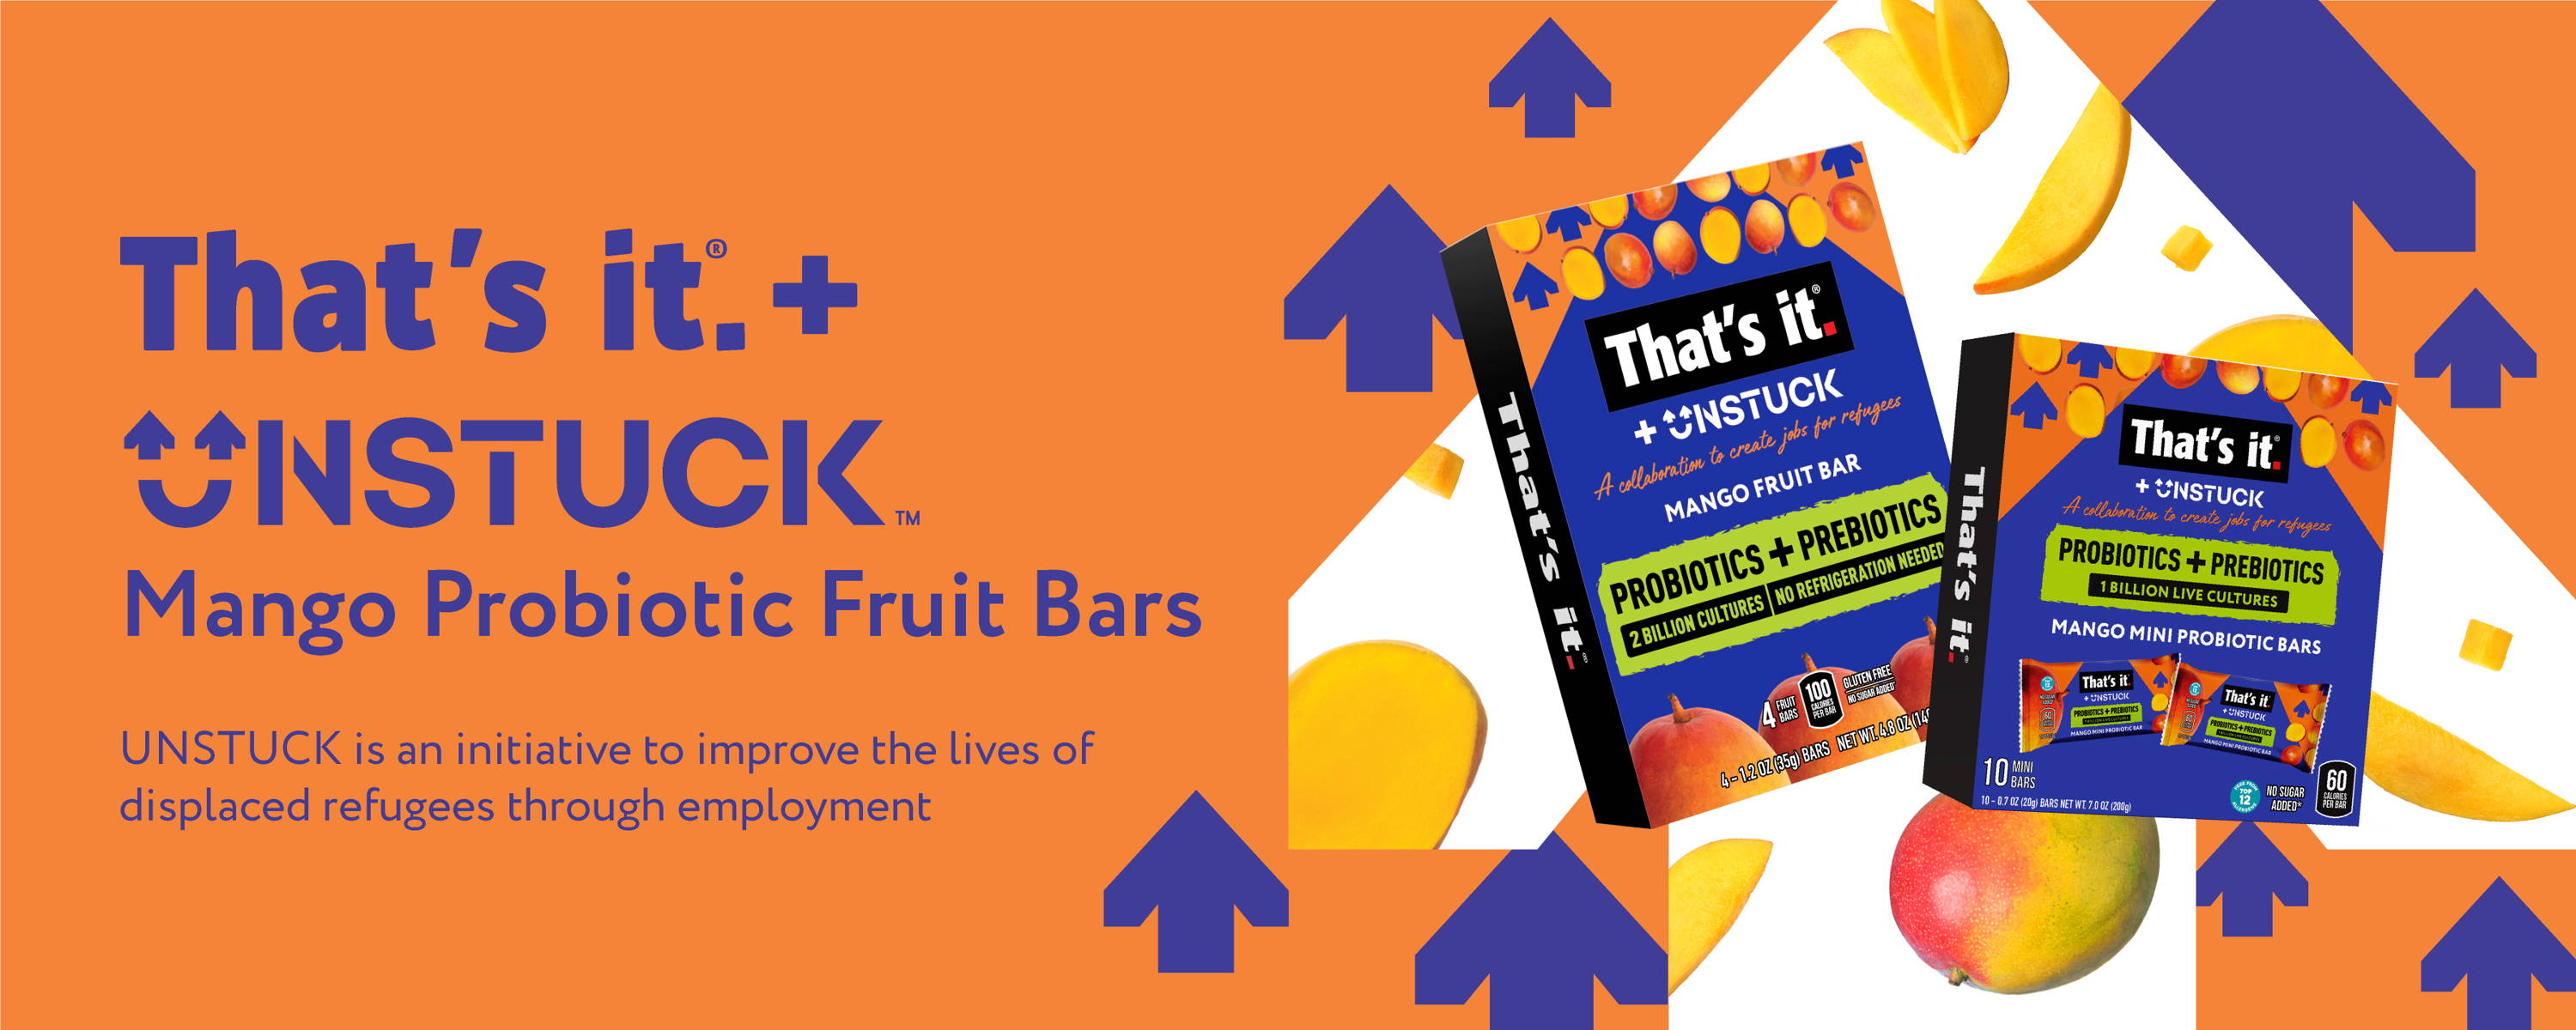 That's it. + Unstuck Mango Probiotic Fruit Bars. Unstuck is an initiative to improve the lives of displaced refugees through employment